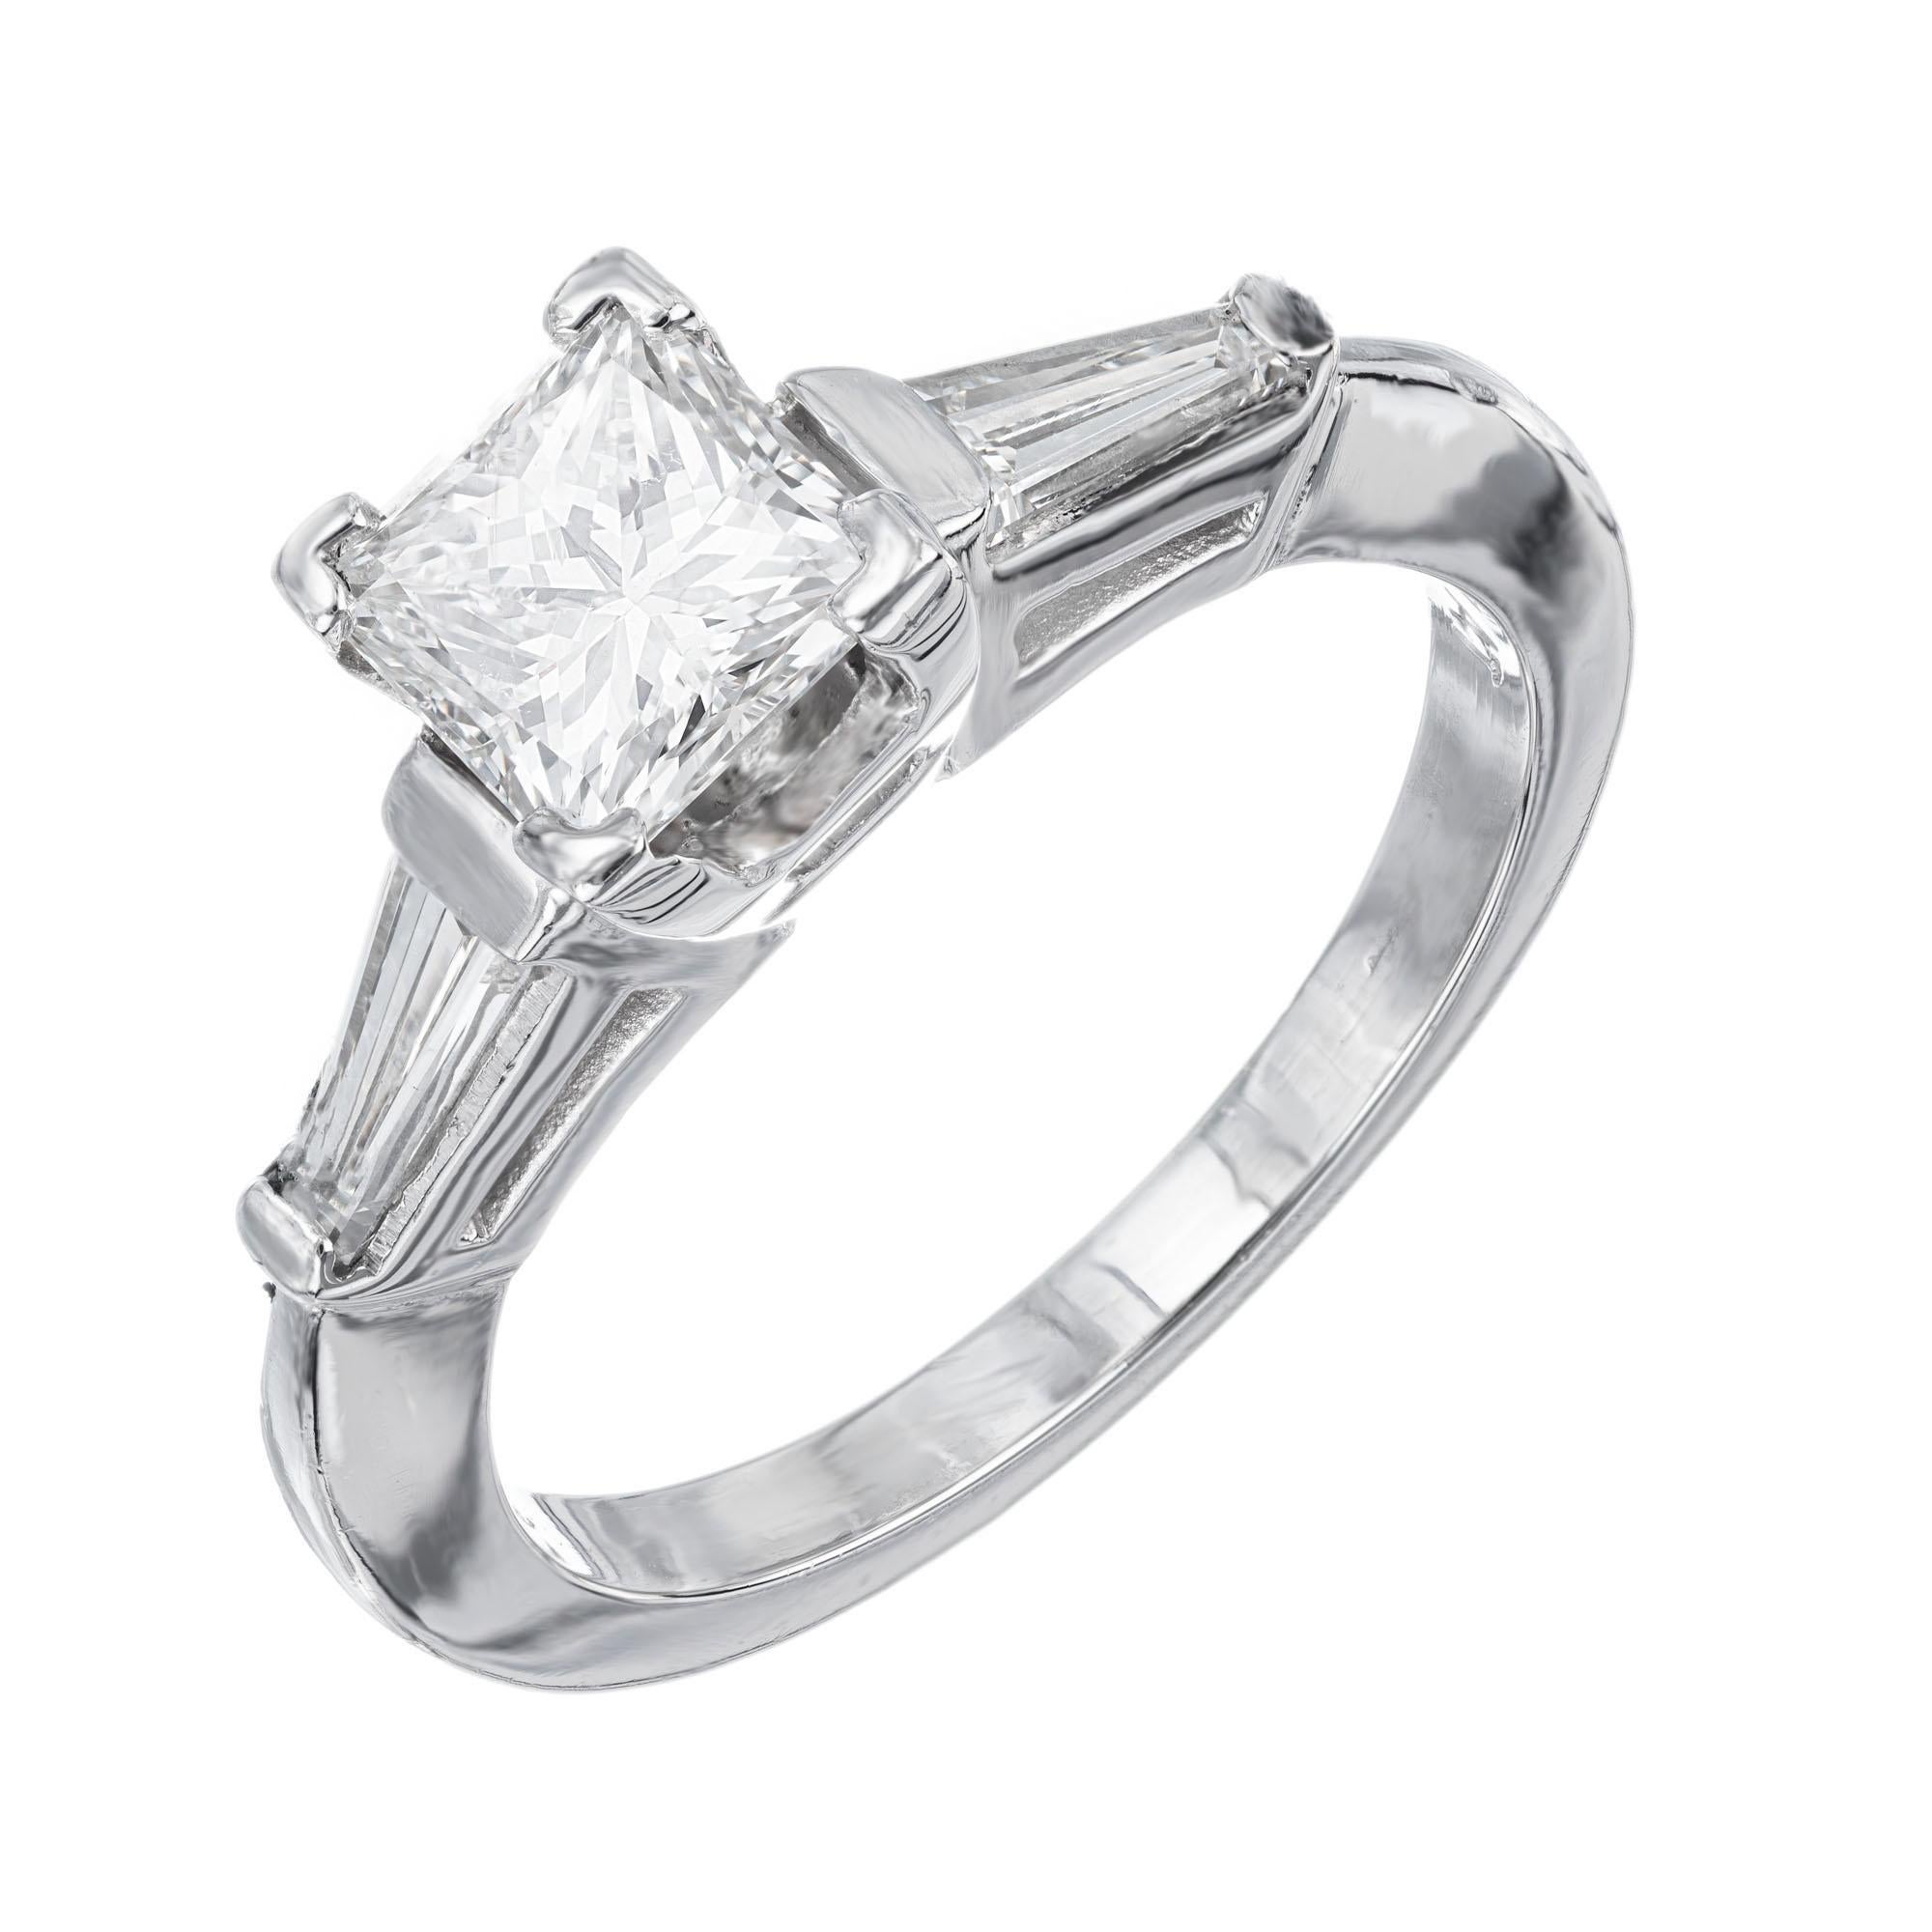 Diamond engagement ring. GIA certified .99ct princess cut diamond set in a platinum three stone simple setting, accented with 2 tapered baguette side diamonds. The center diamond is graded by the GIA as G (near colorless) and has great sparkle.